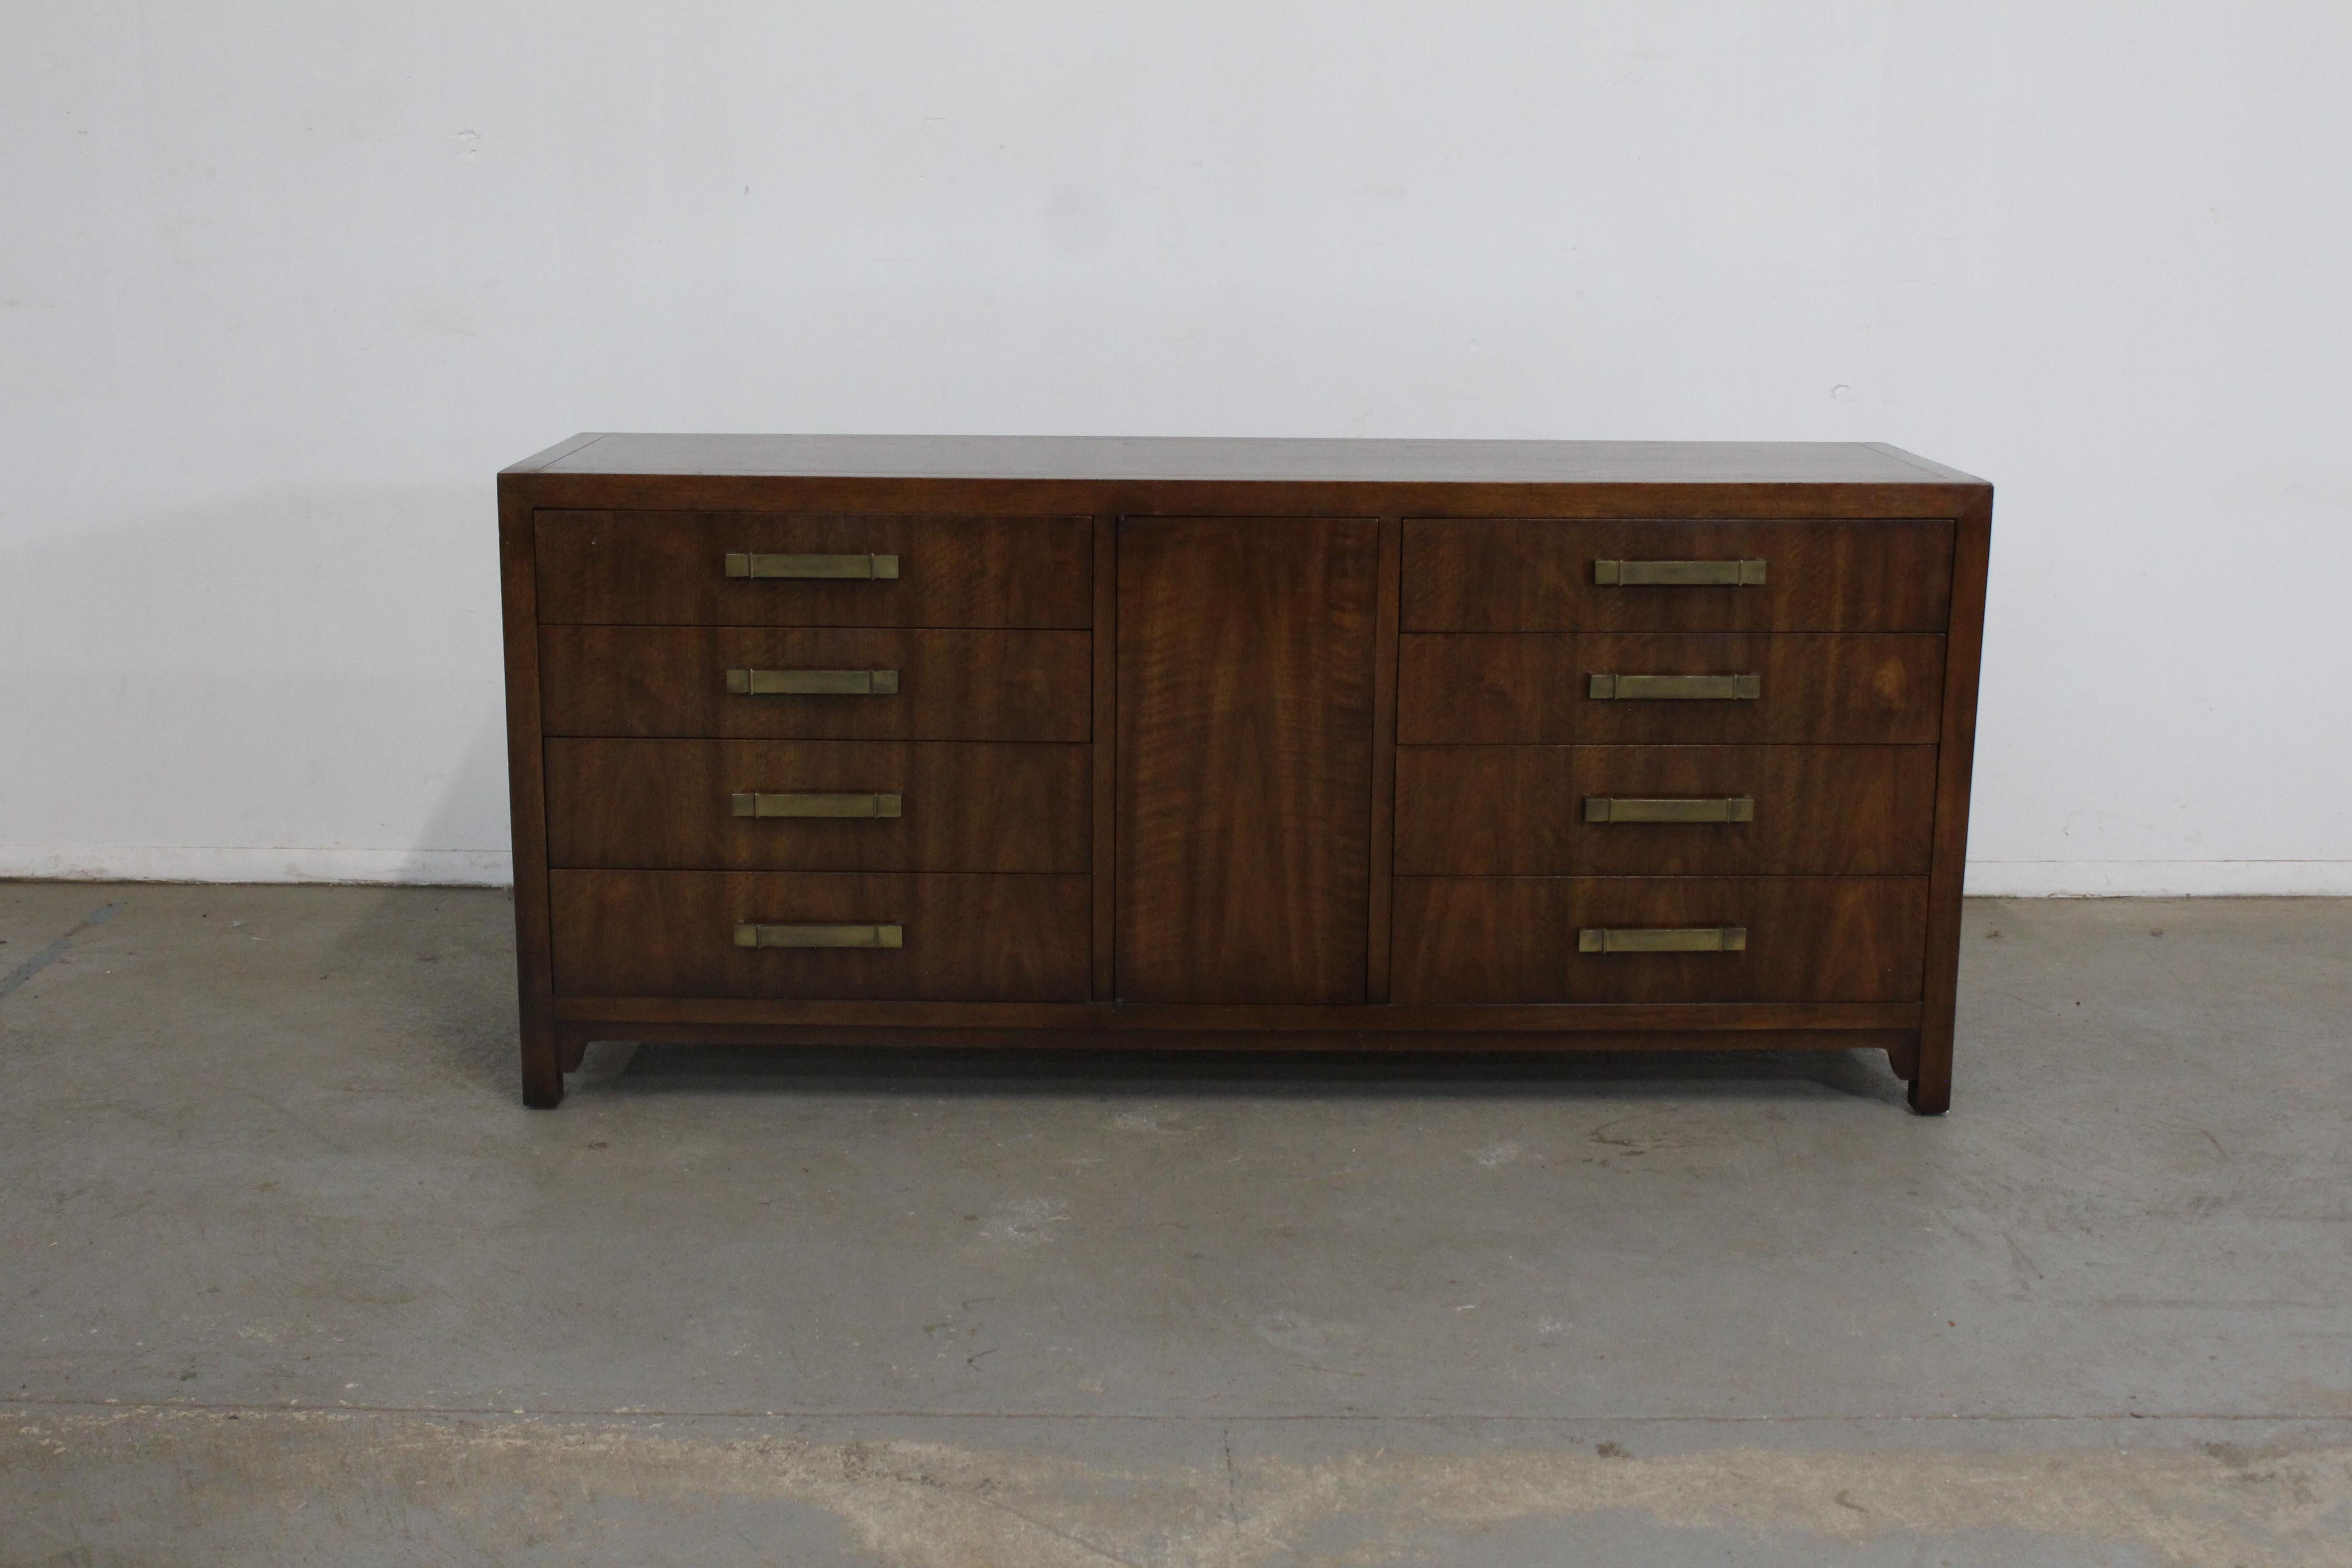 Mid-Century Modern Asain Credenza/Dresser Black Mahoghany by Heritage Furniture

Offered is a beautiful mid-century modern Asian-style credenza, made by Heritage. This piece will add style to any space or design project. We also have amtching Chest